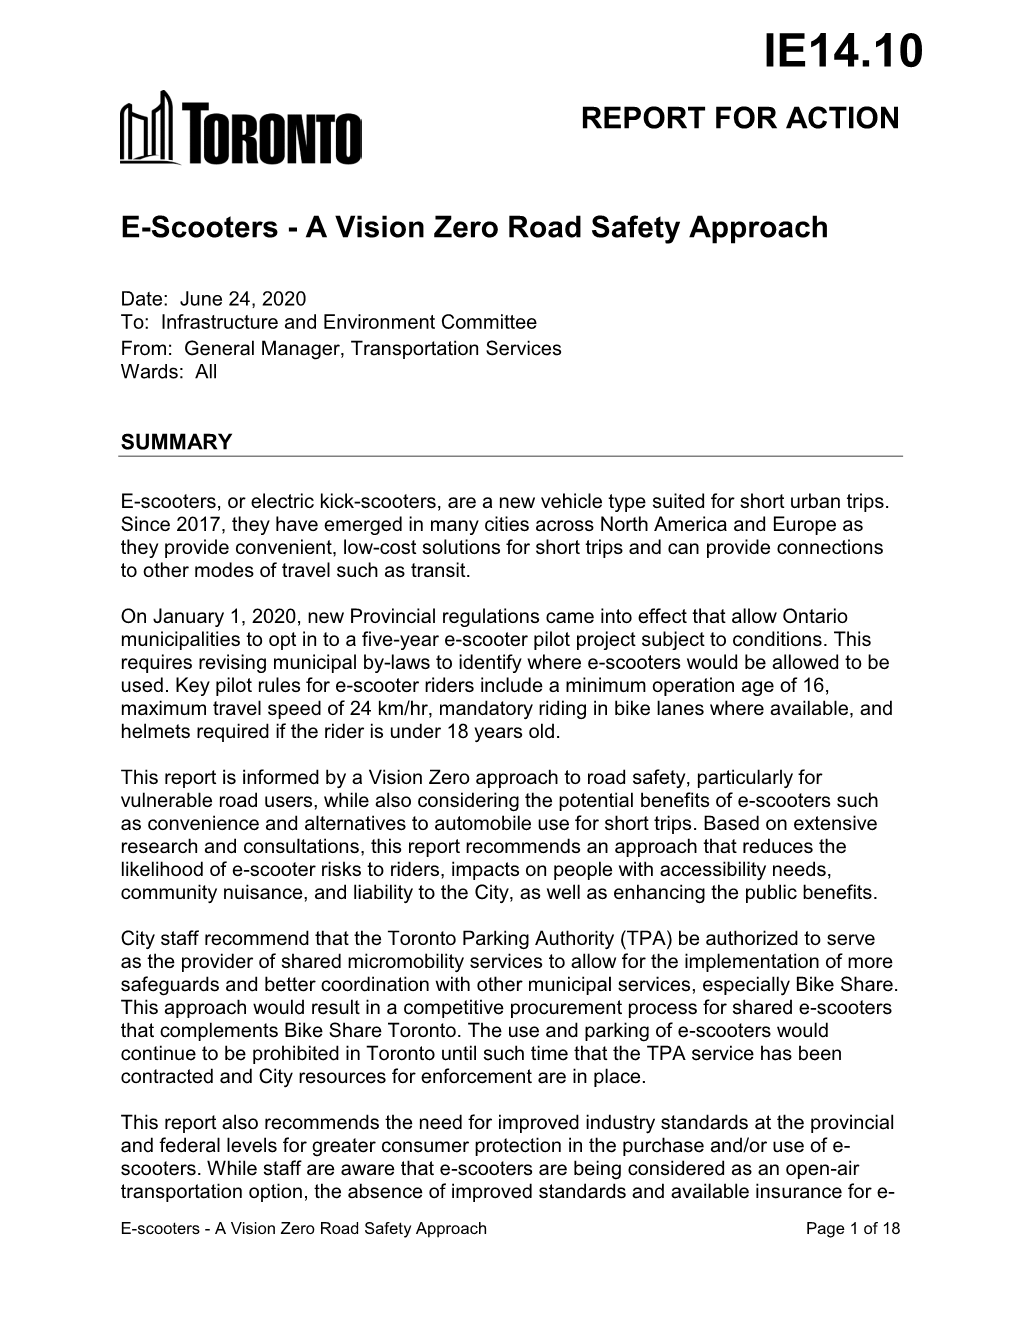 E-Scooters - a Vision Zero Road Safety Approach